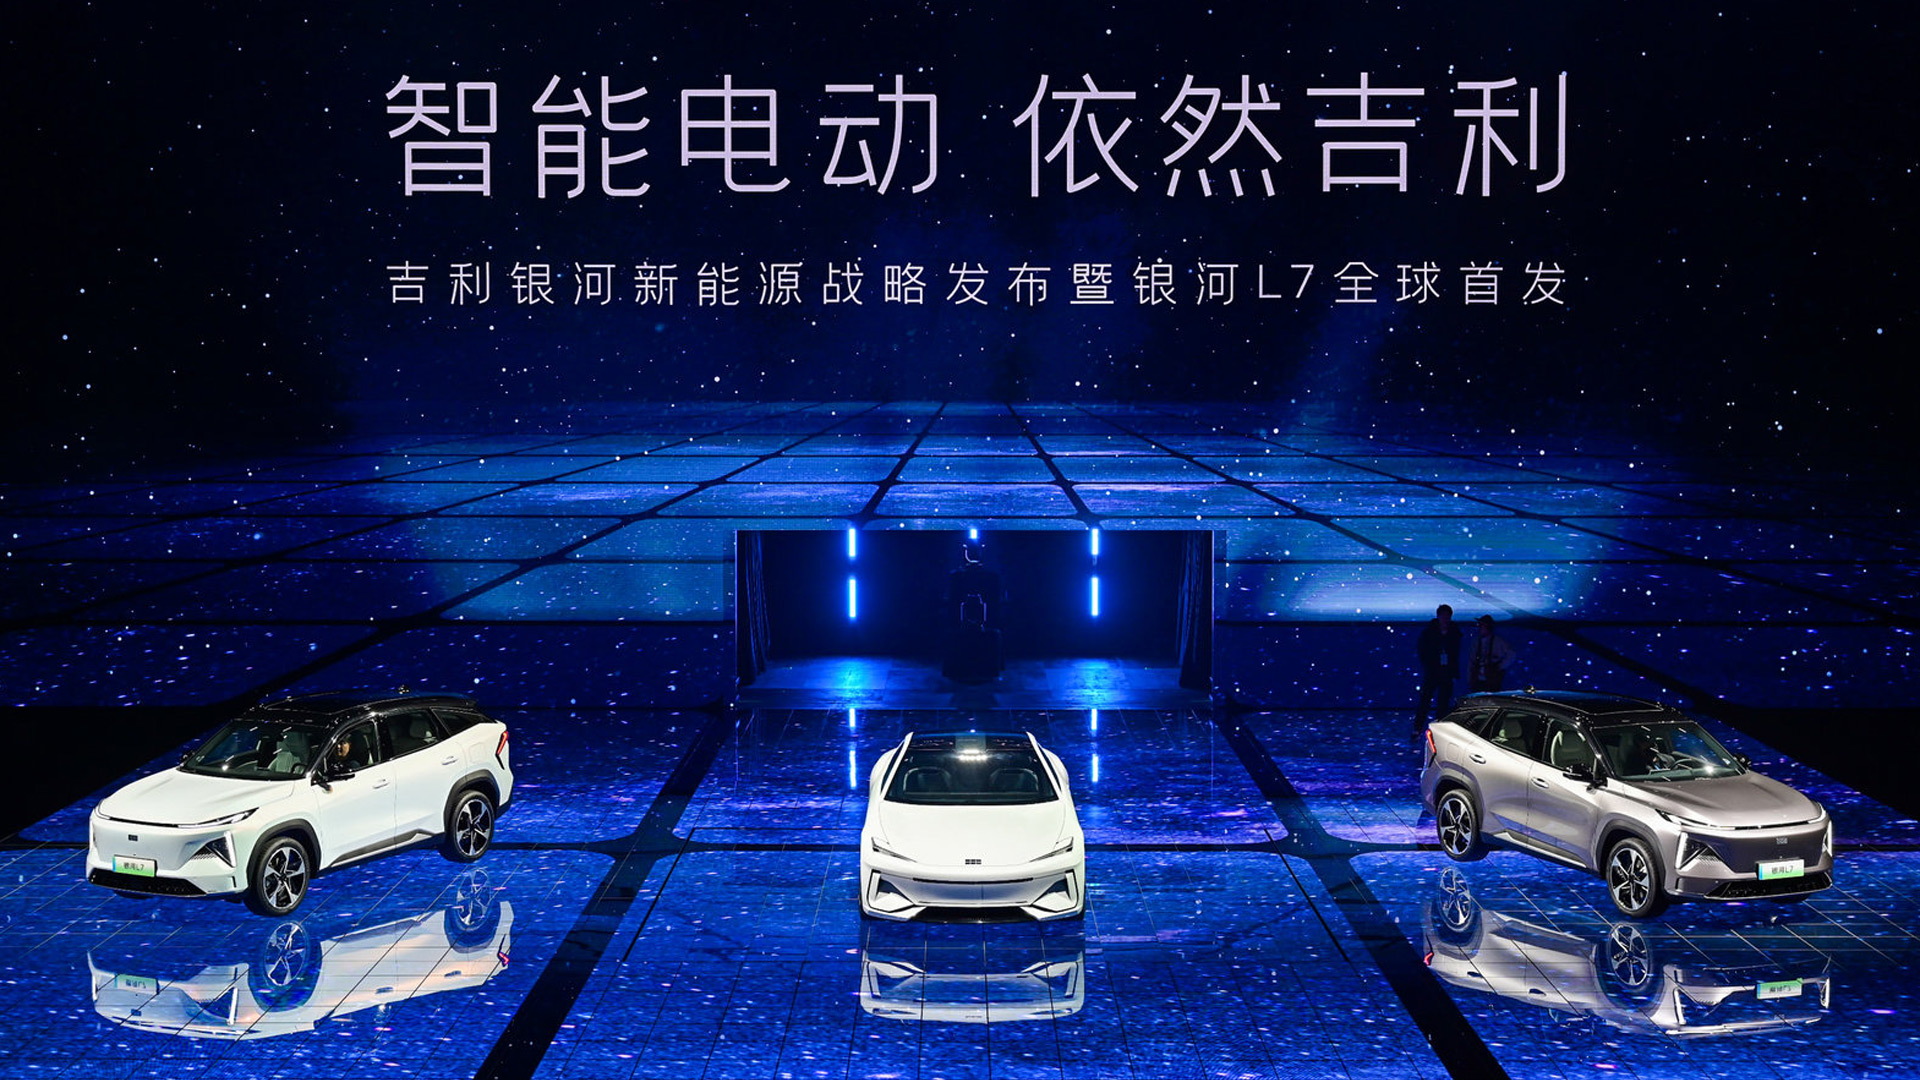 Geely Galaxy L7 and Light concept